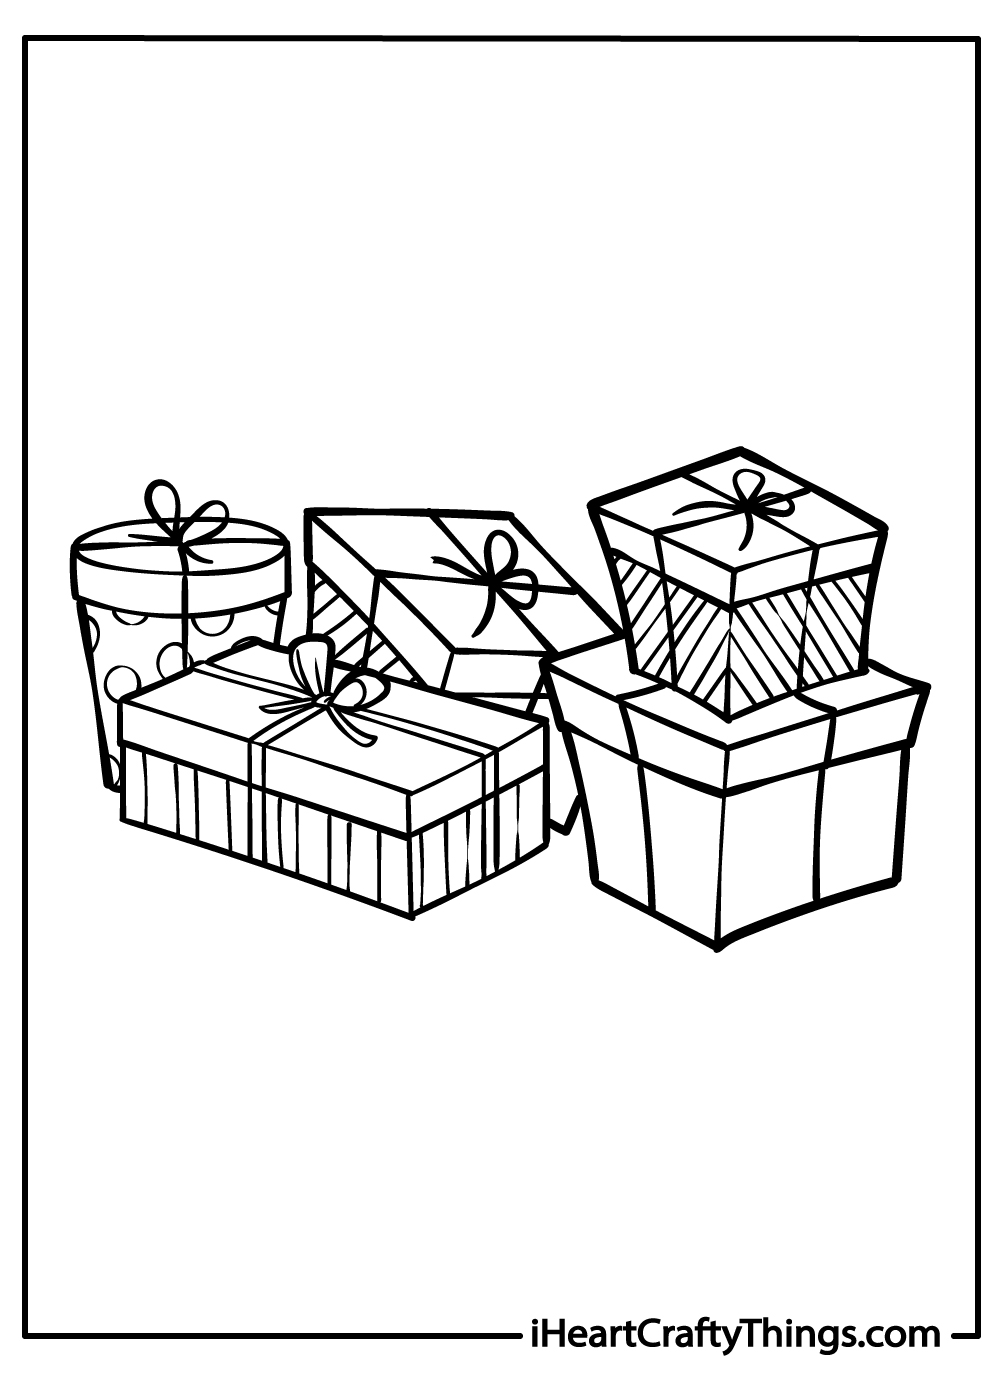 Christmas presents coloring pages free download